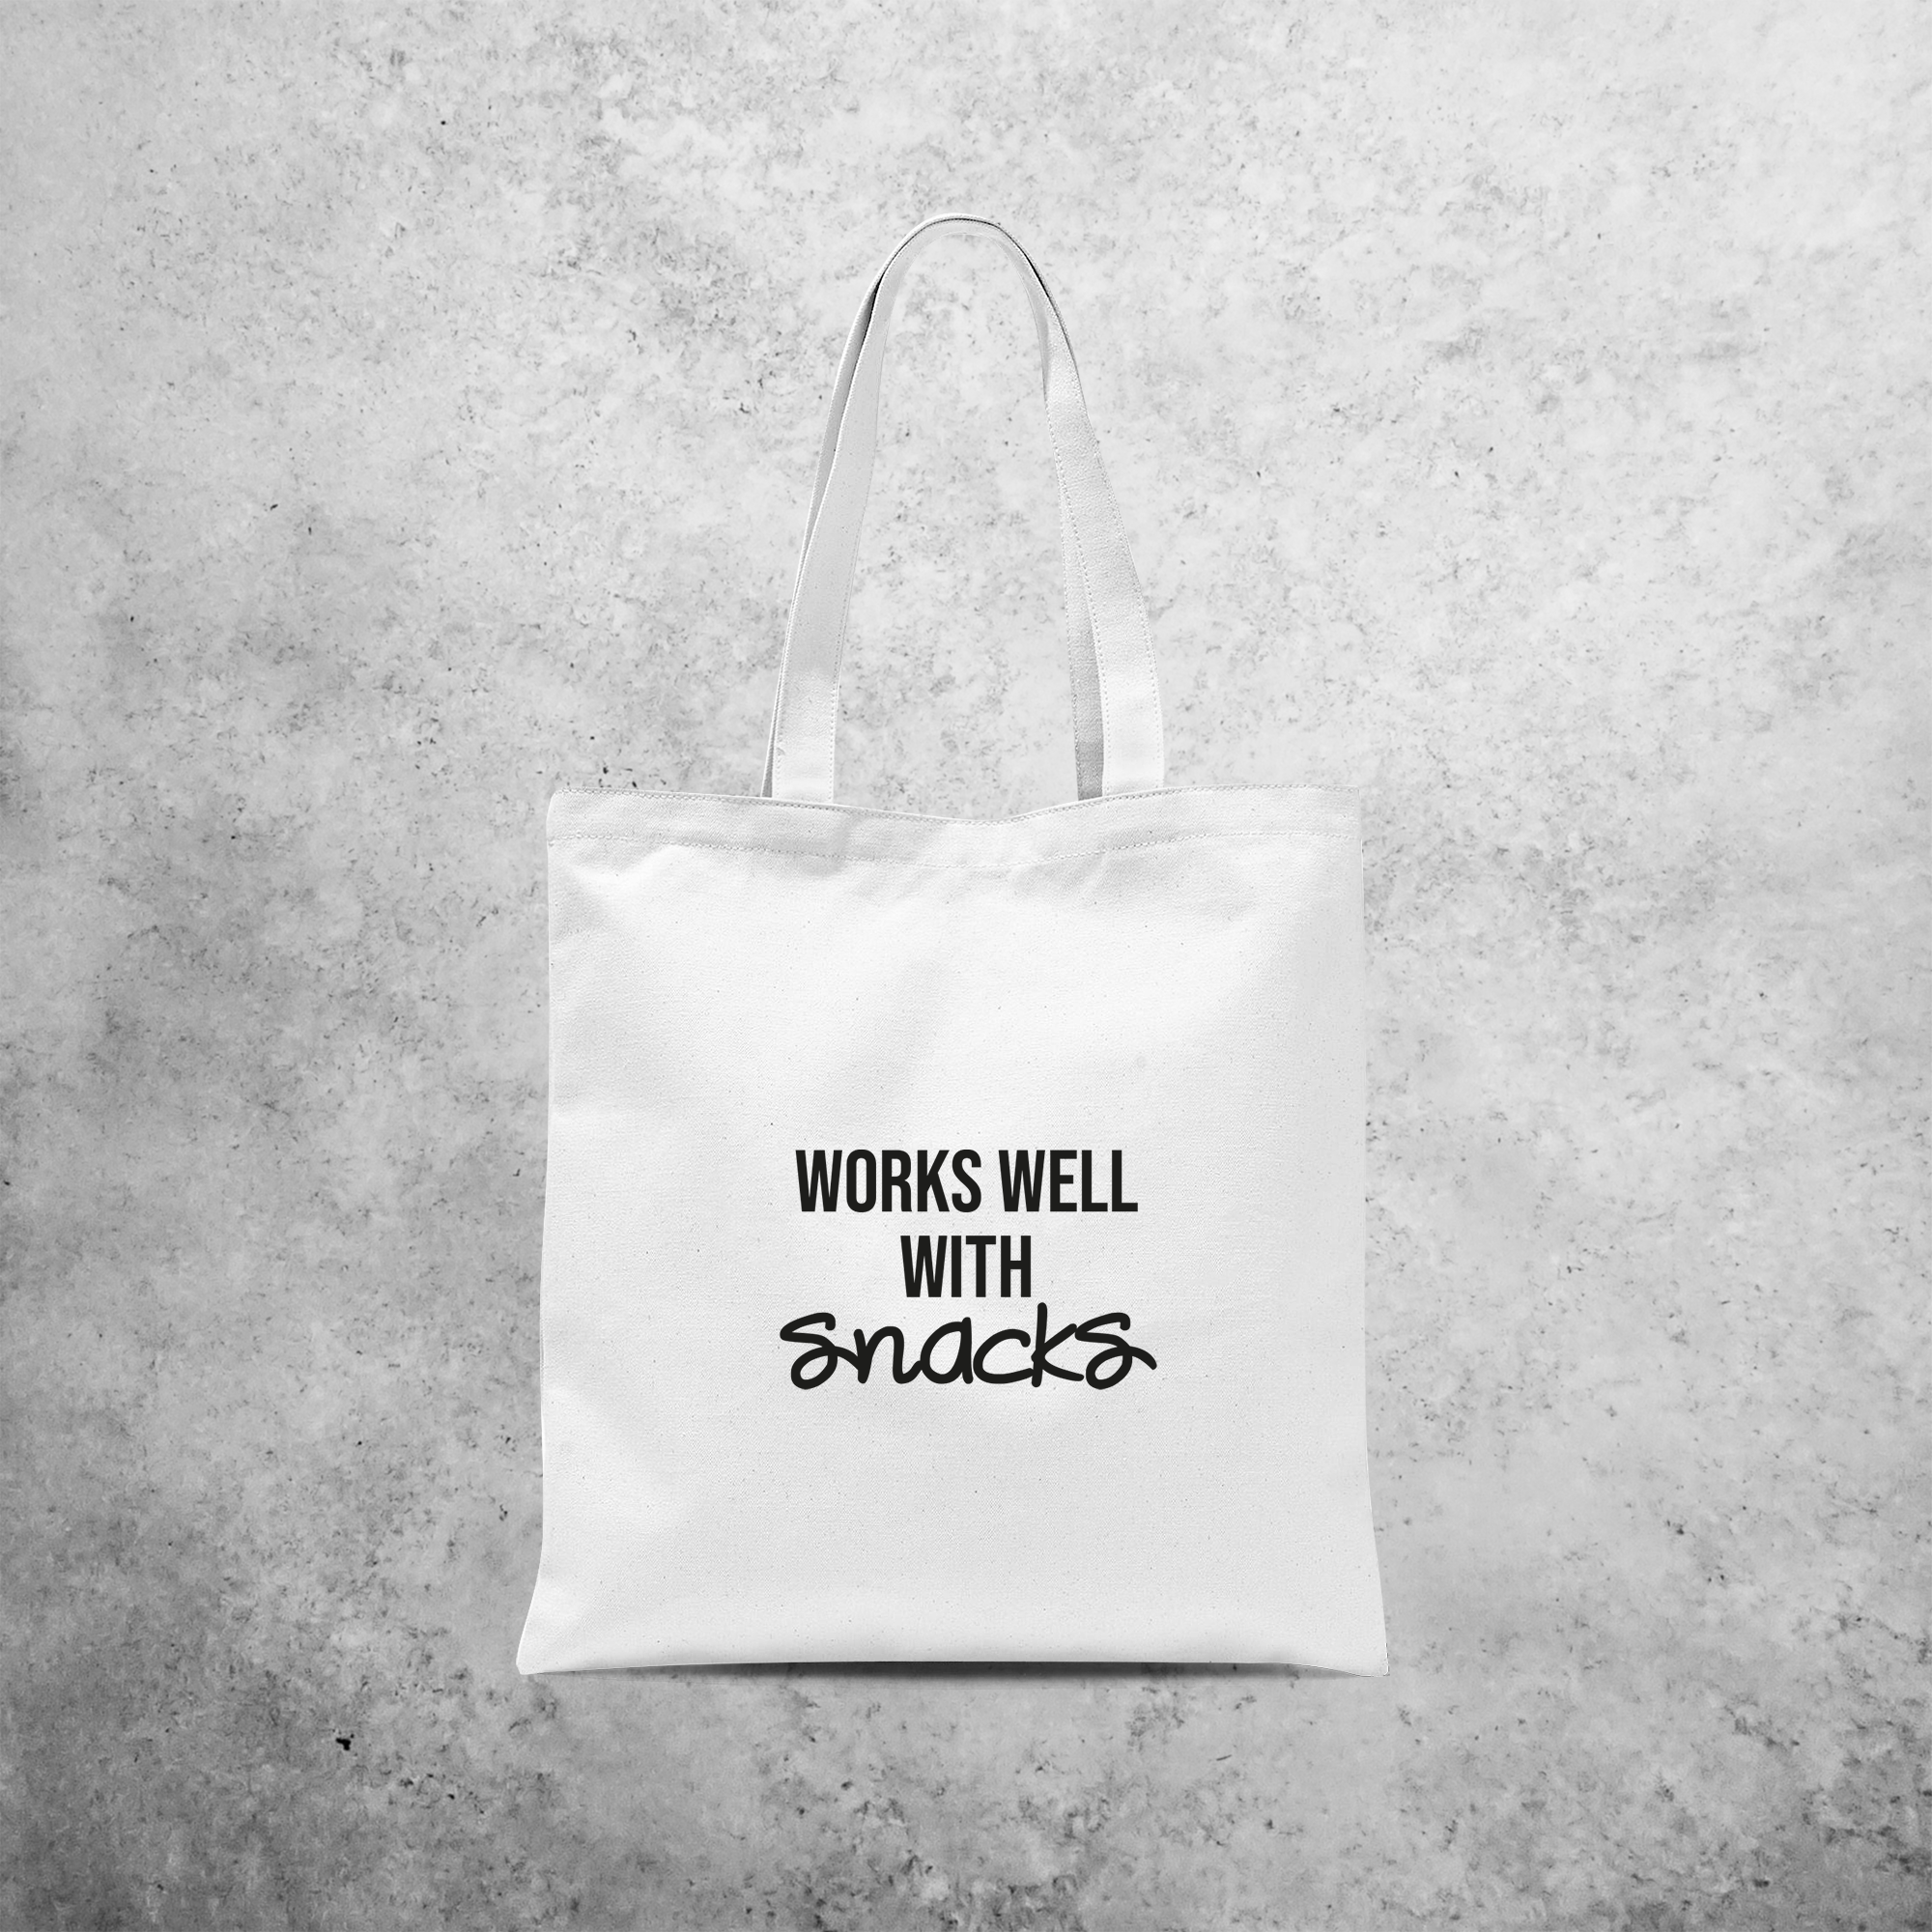 'Works well with snacks' tote bag